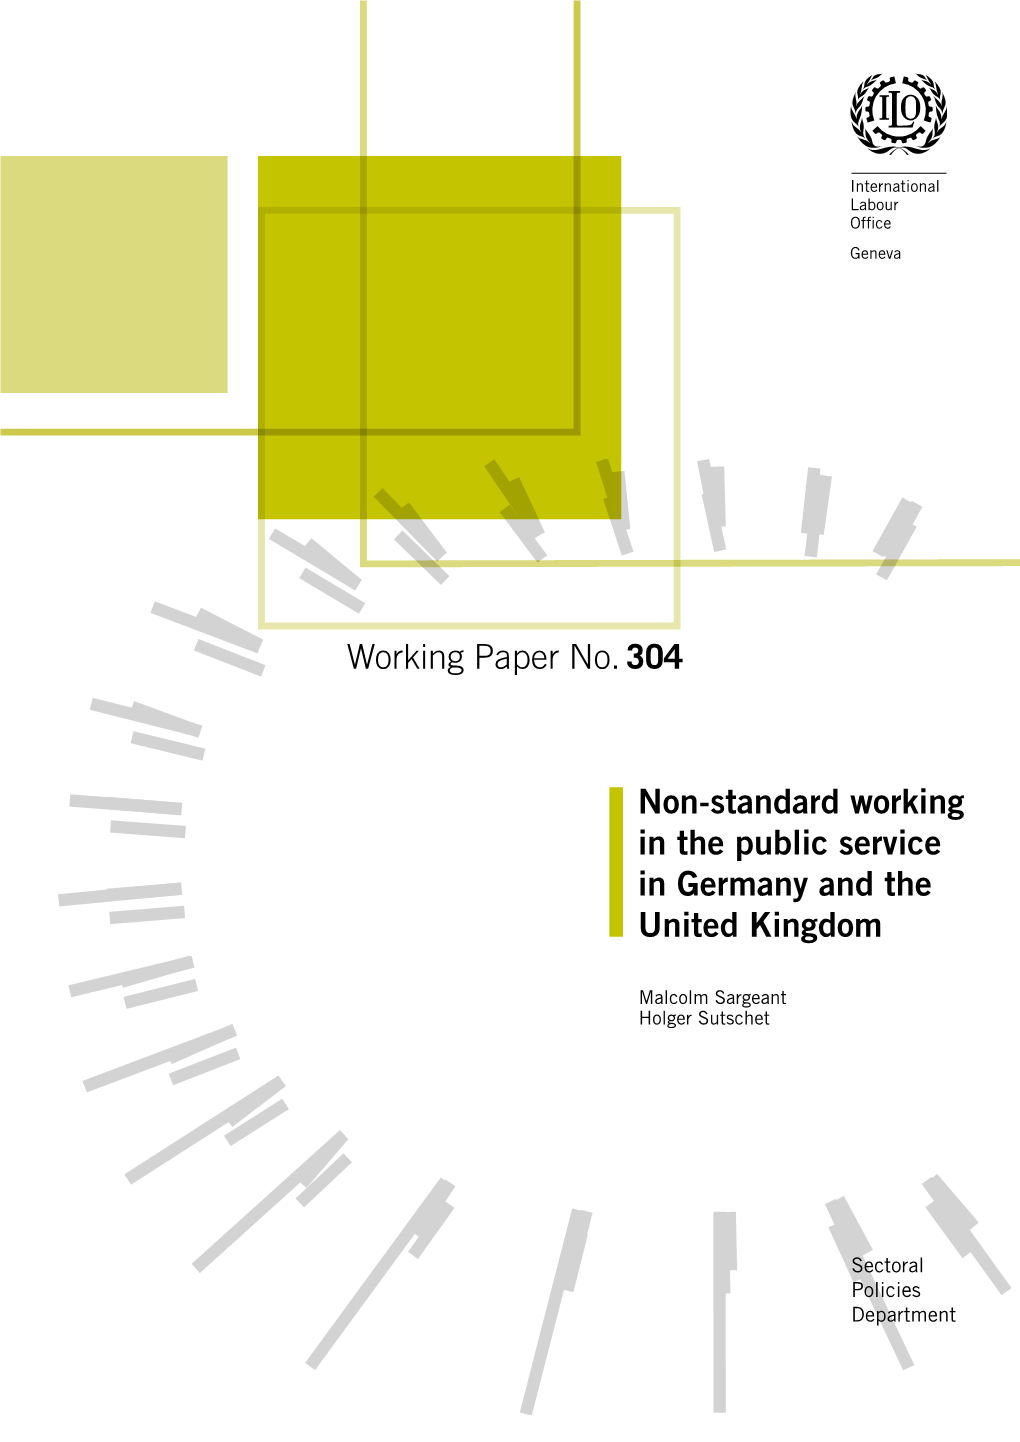 Non-Standard Working in the Public Service in Germany and the United Kingdom